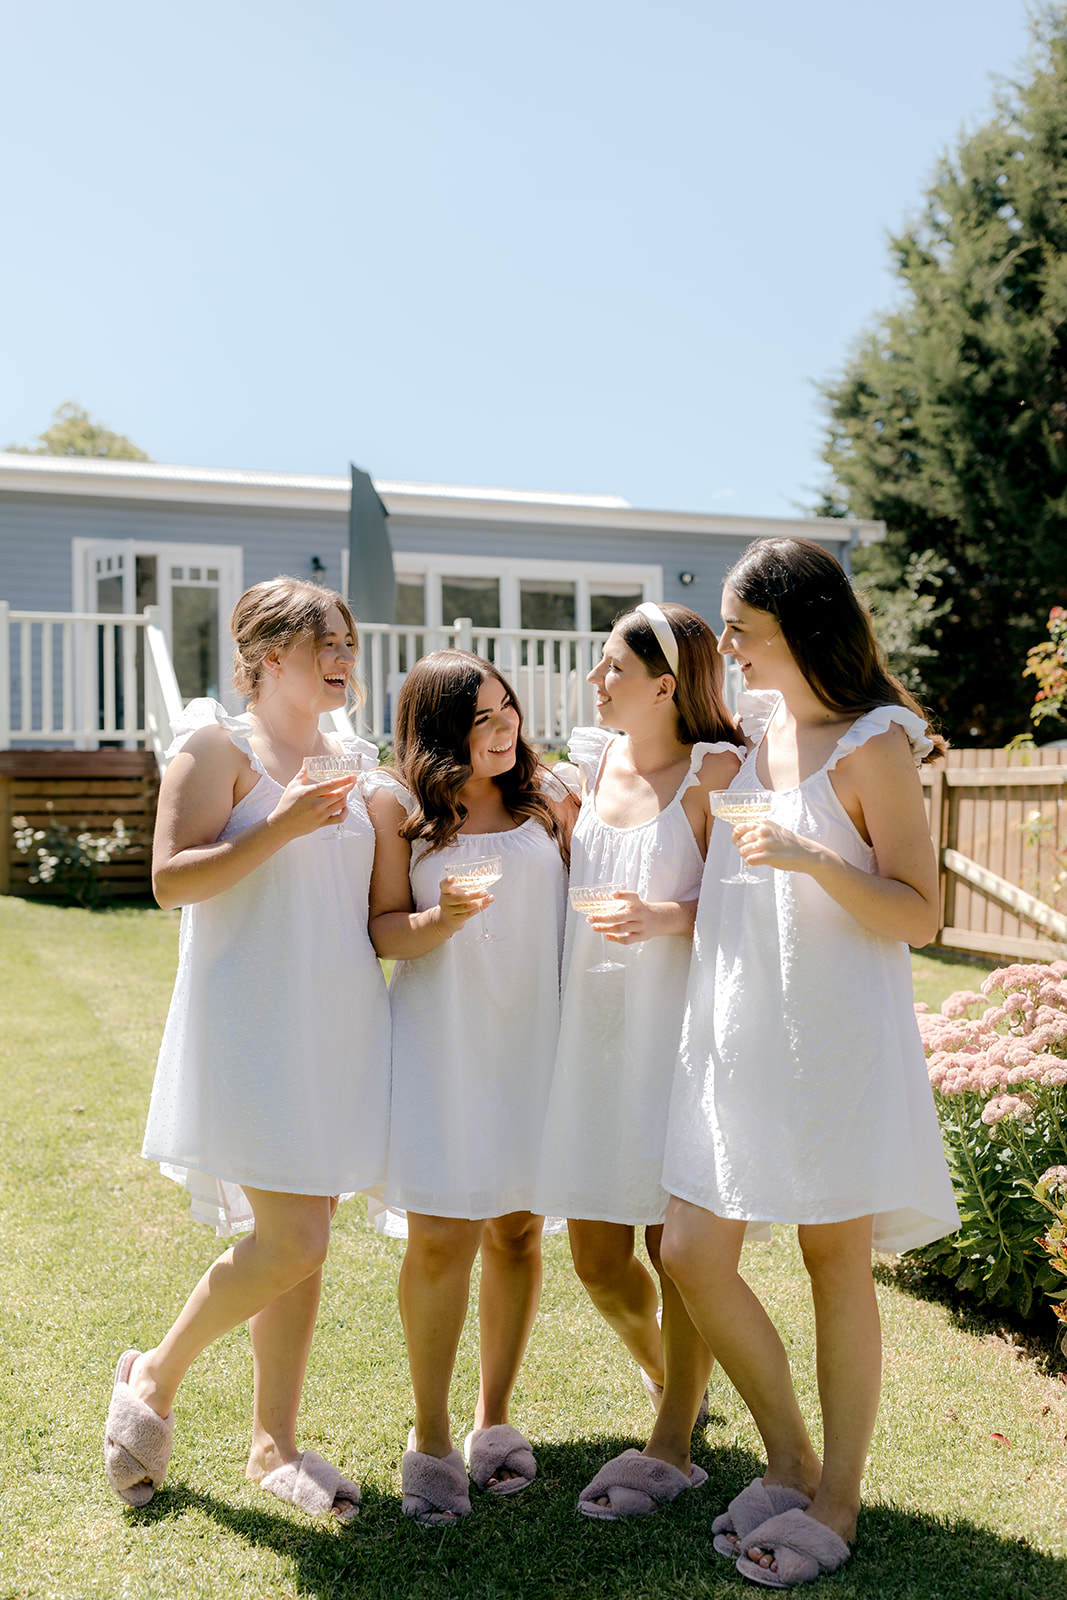 Bridesmaids popping champagne whilst getting ready for an elegant country wedding.